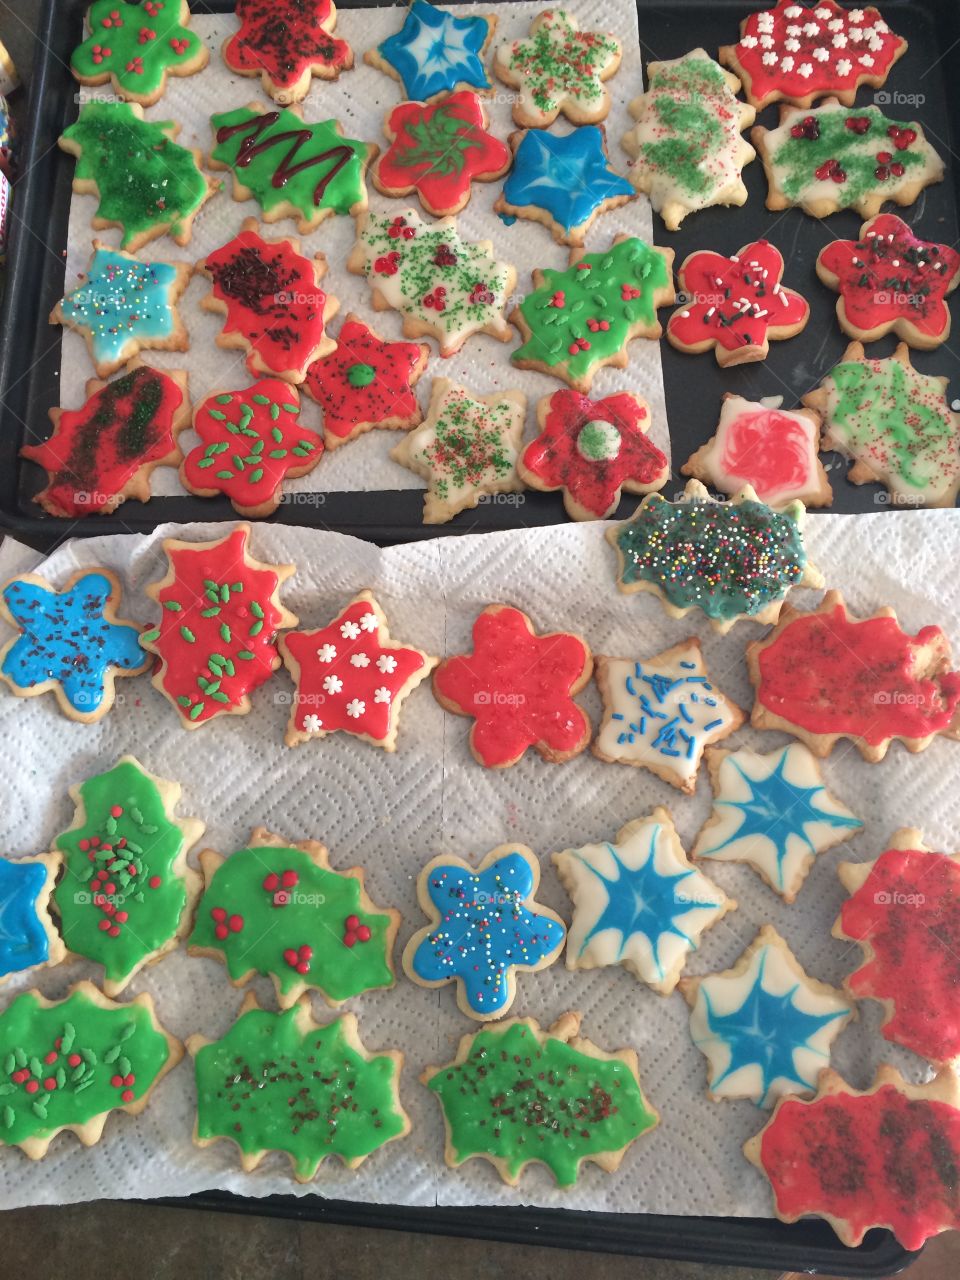 Christmas baking. Holiday fun with the kids